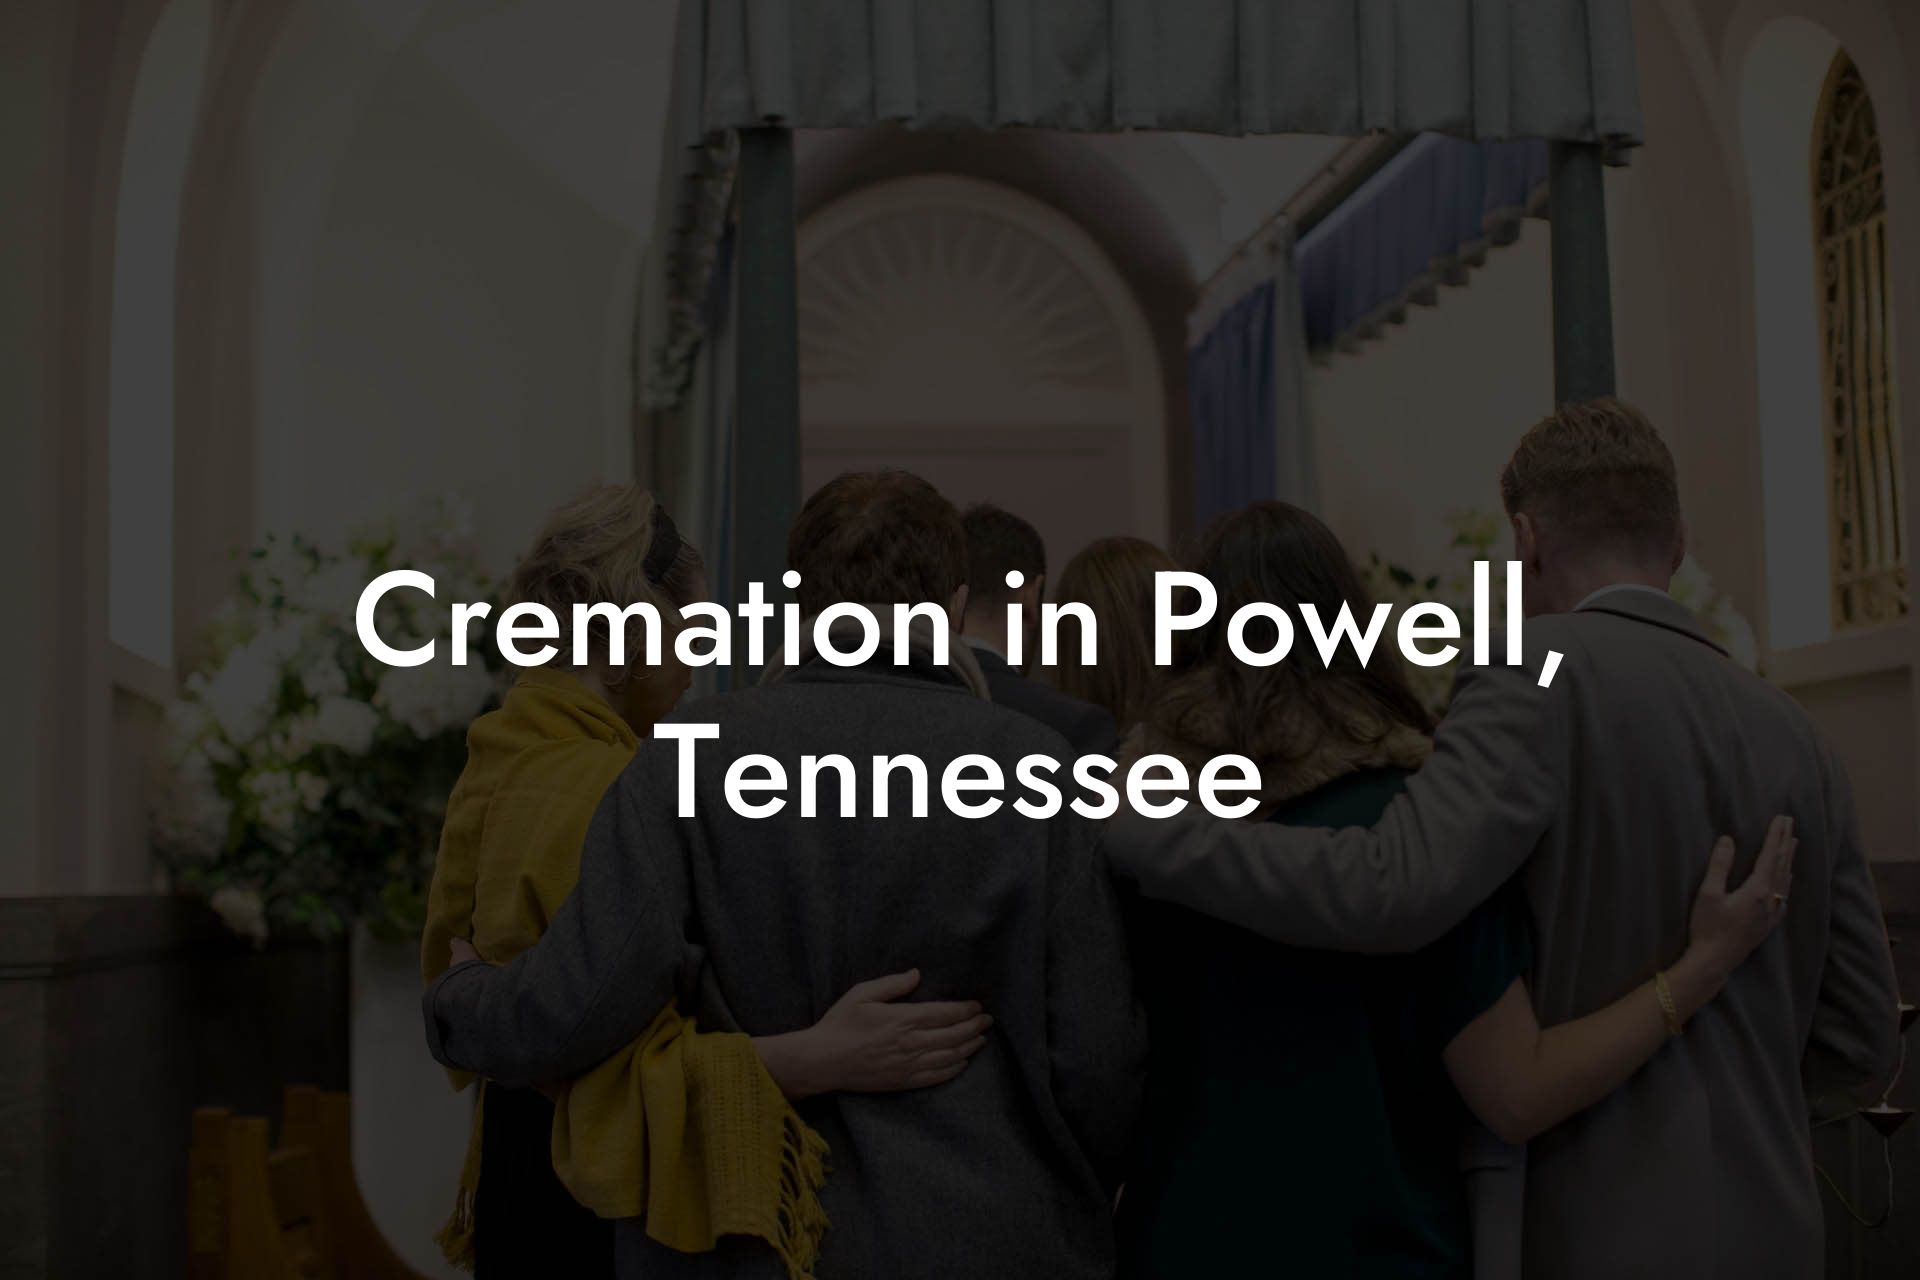 Cremation in Powell, Tennessee